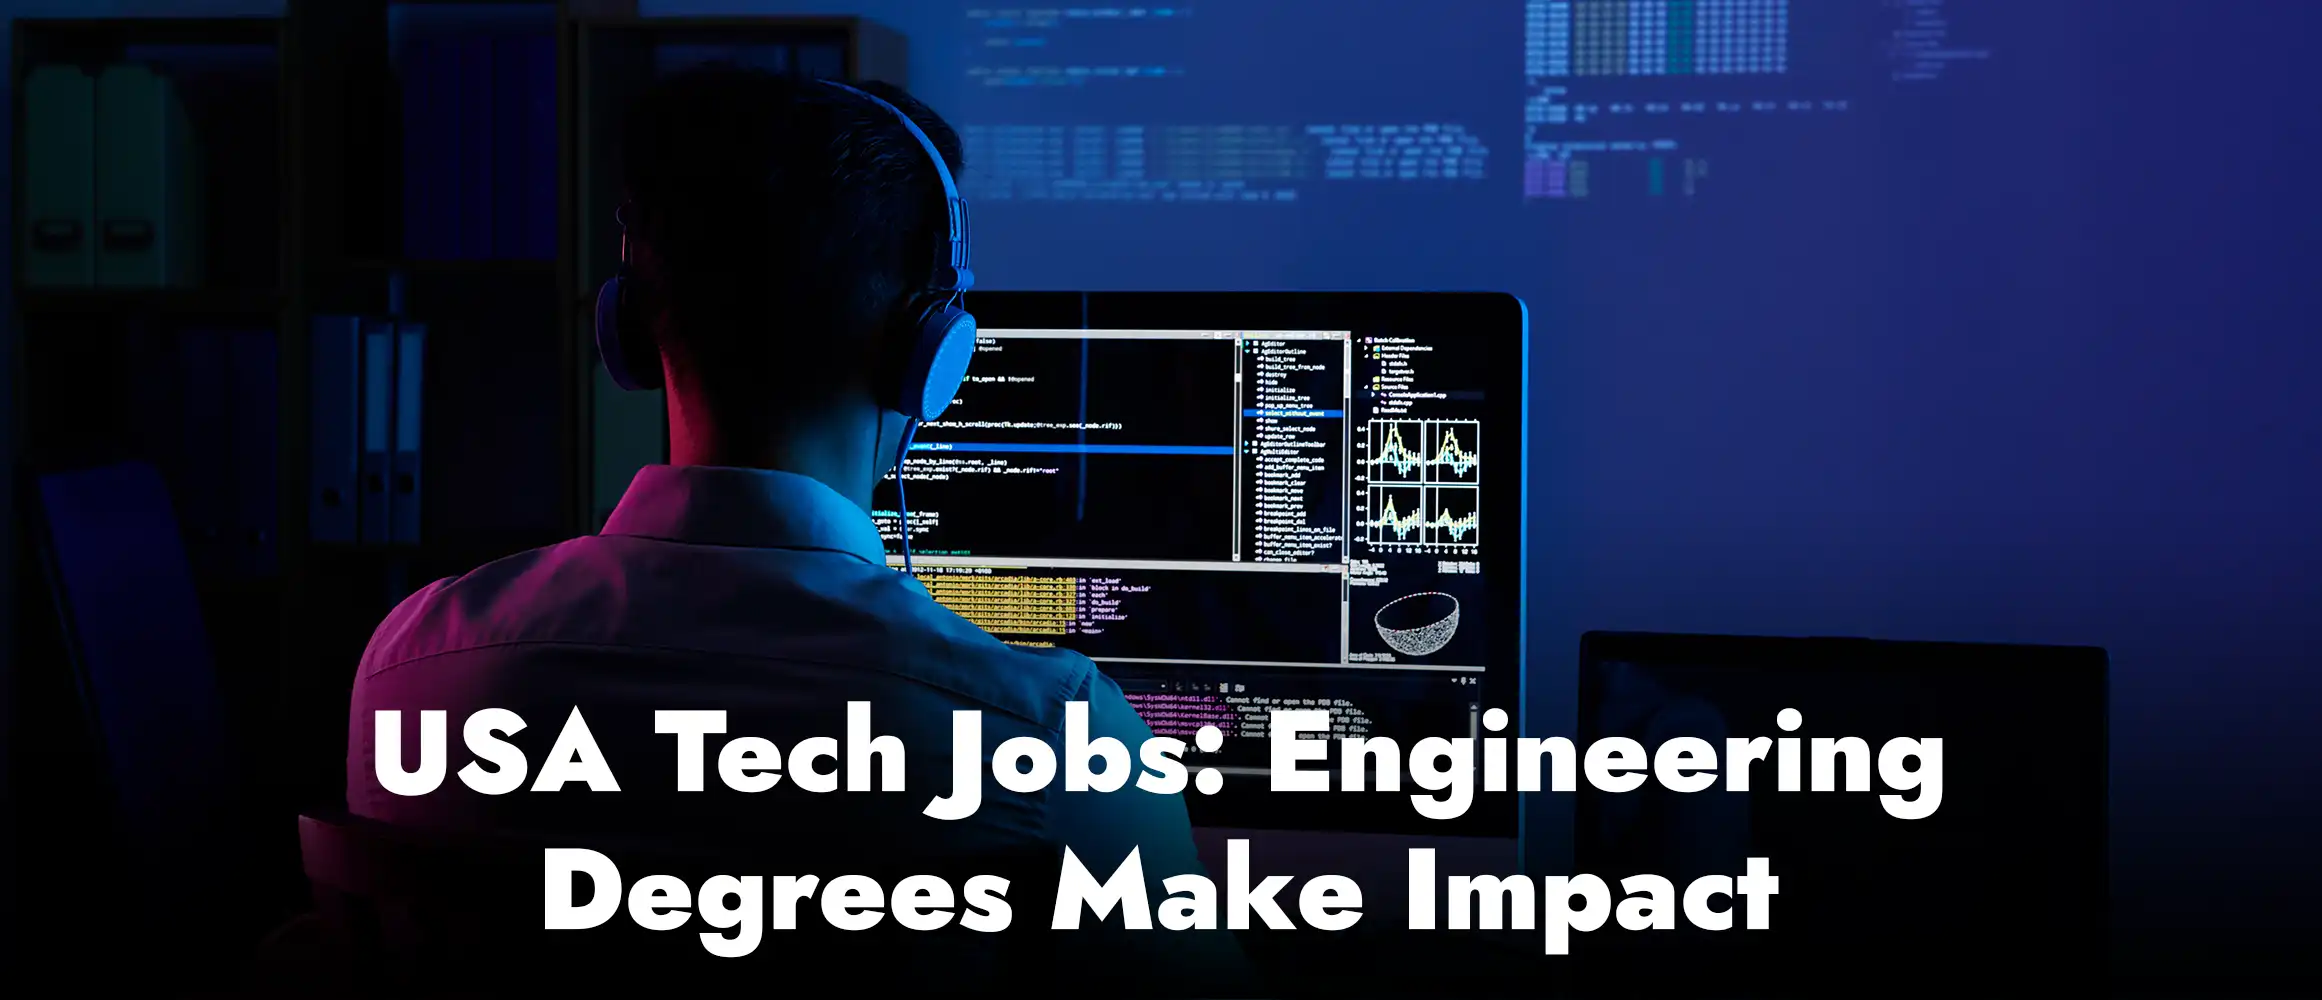 Students Landing Tech Jobs in the USA After Engineering Degrees